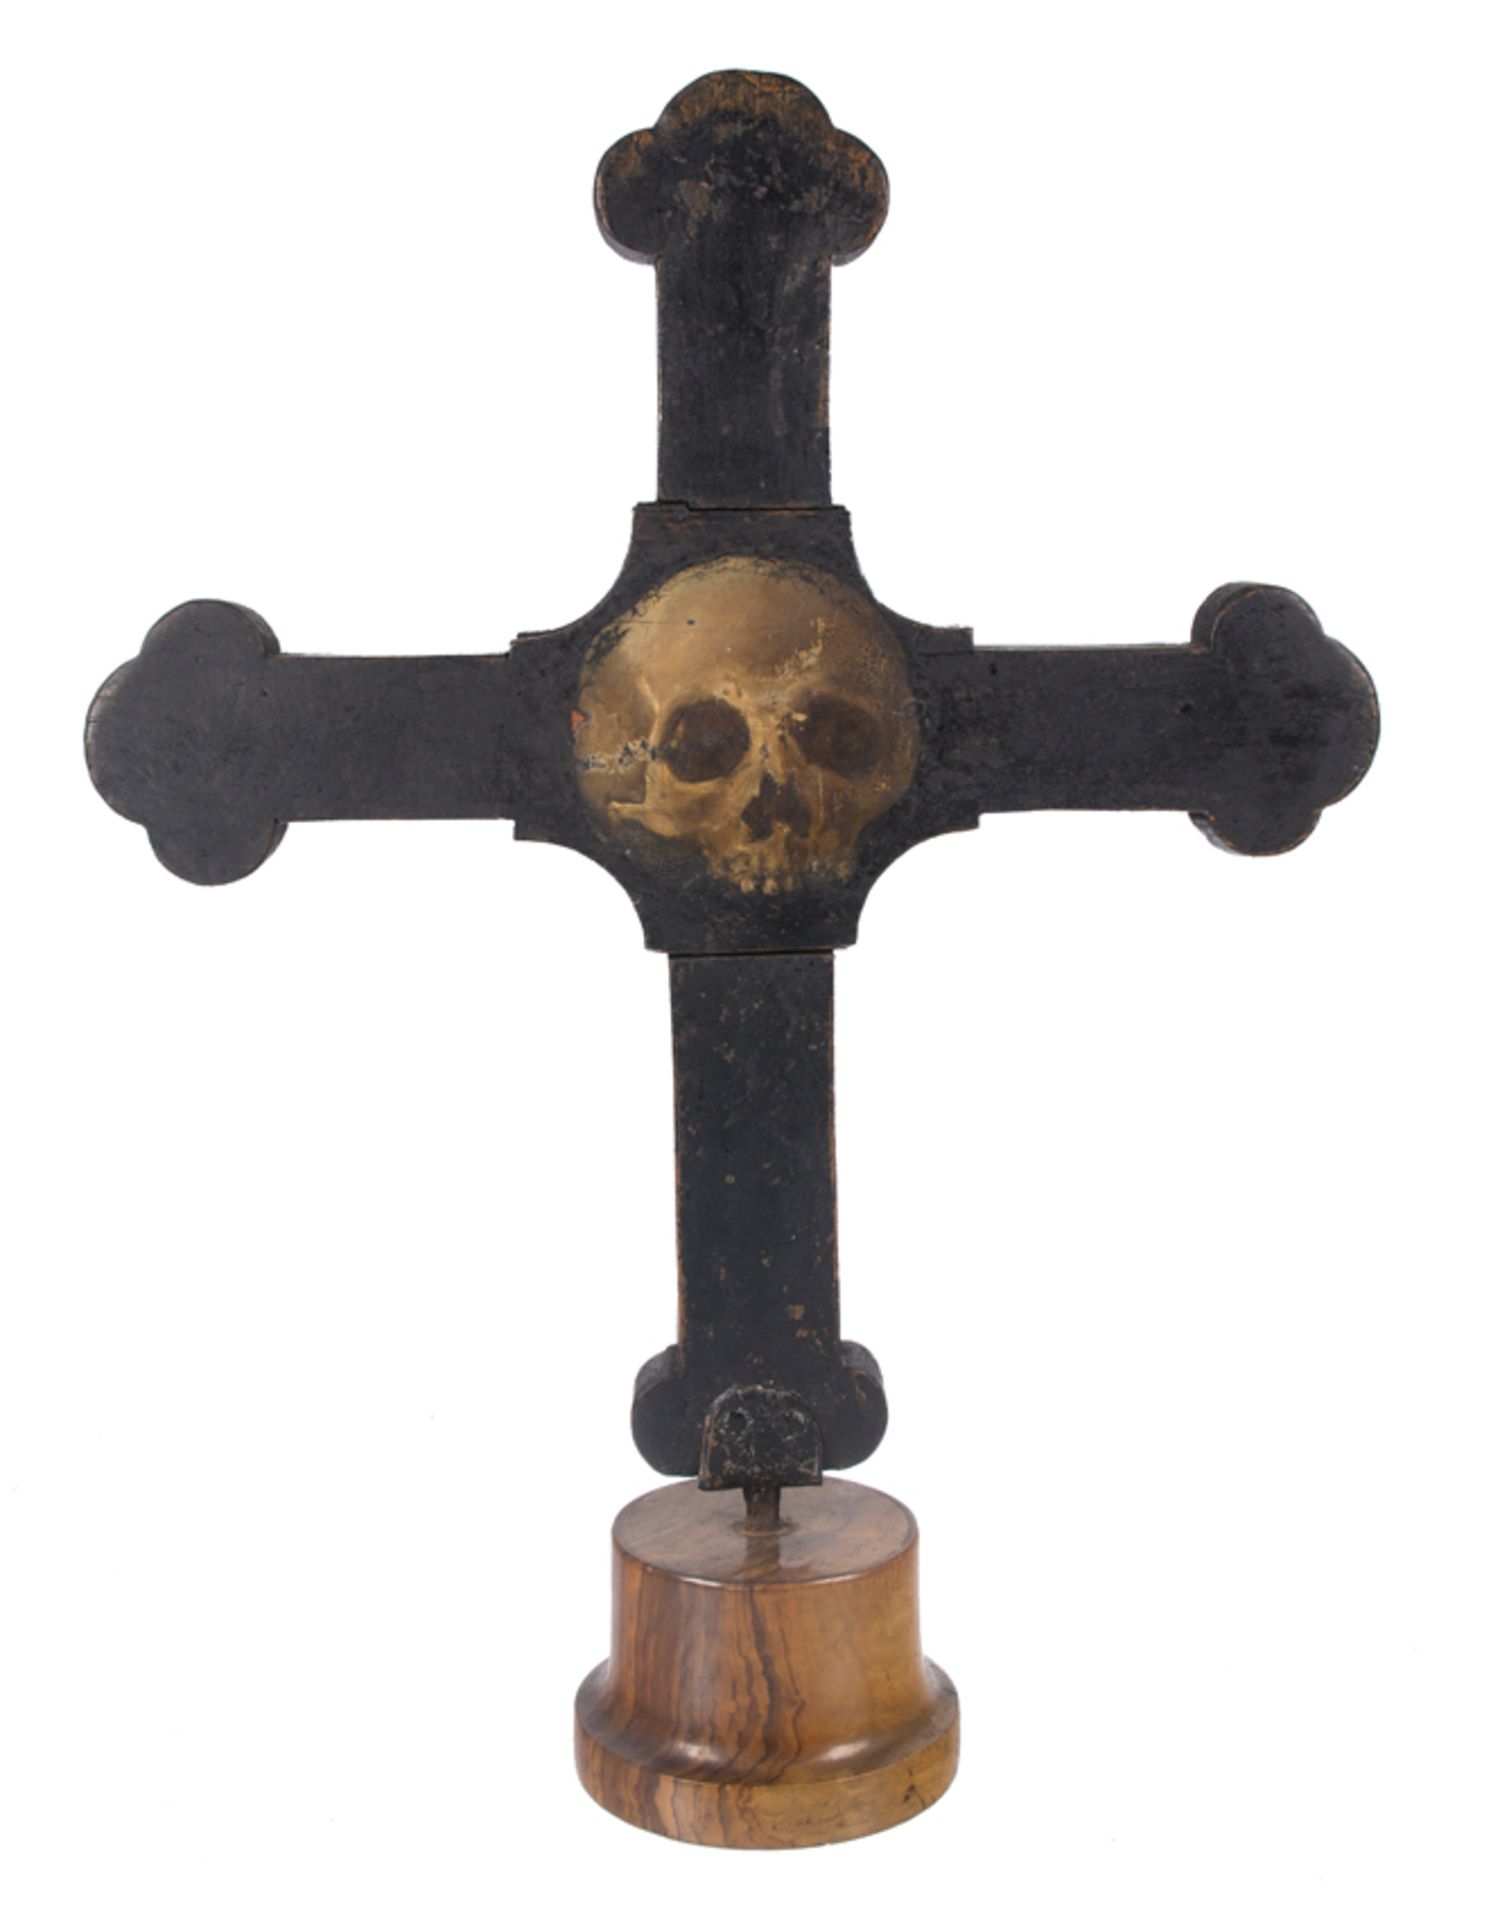 Black-dyed and polychromed wooden Spanish cross with iron fittings. 17th century. - Bild 3 aus 4